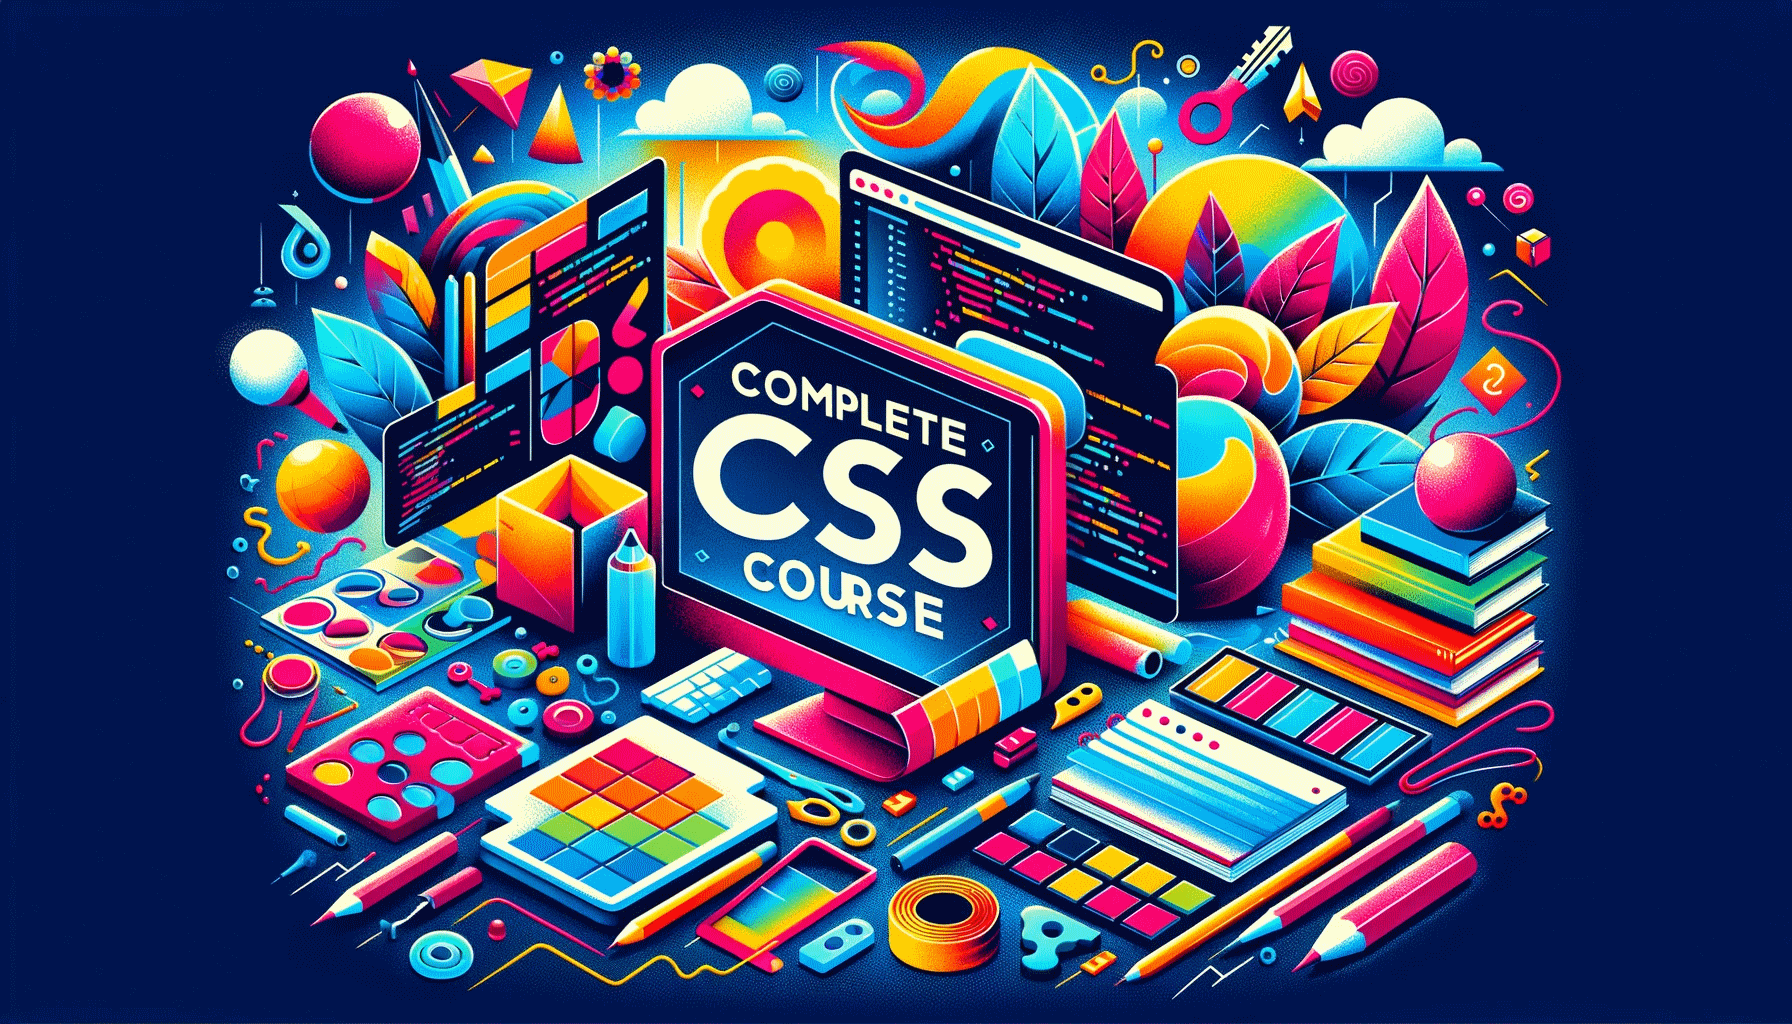 A Comprehensive Course on CSS